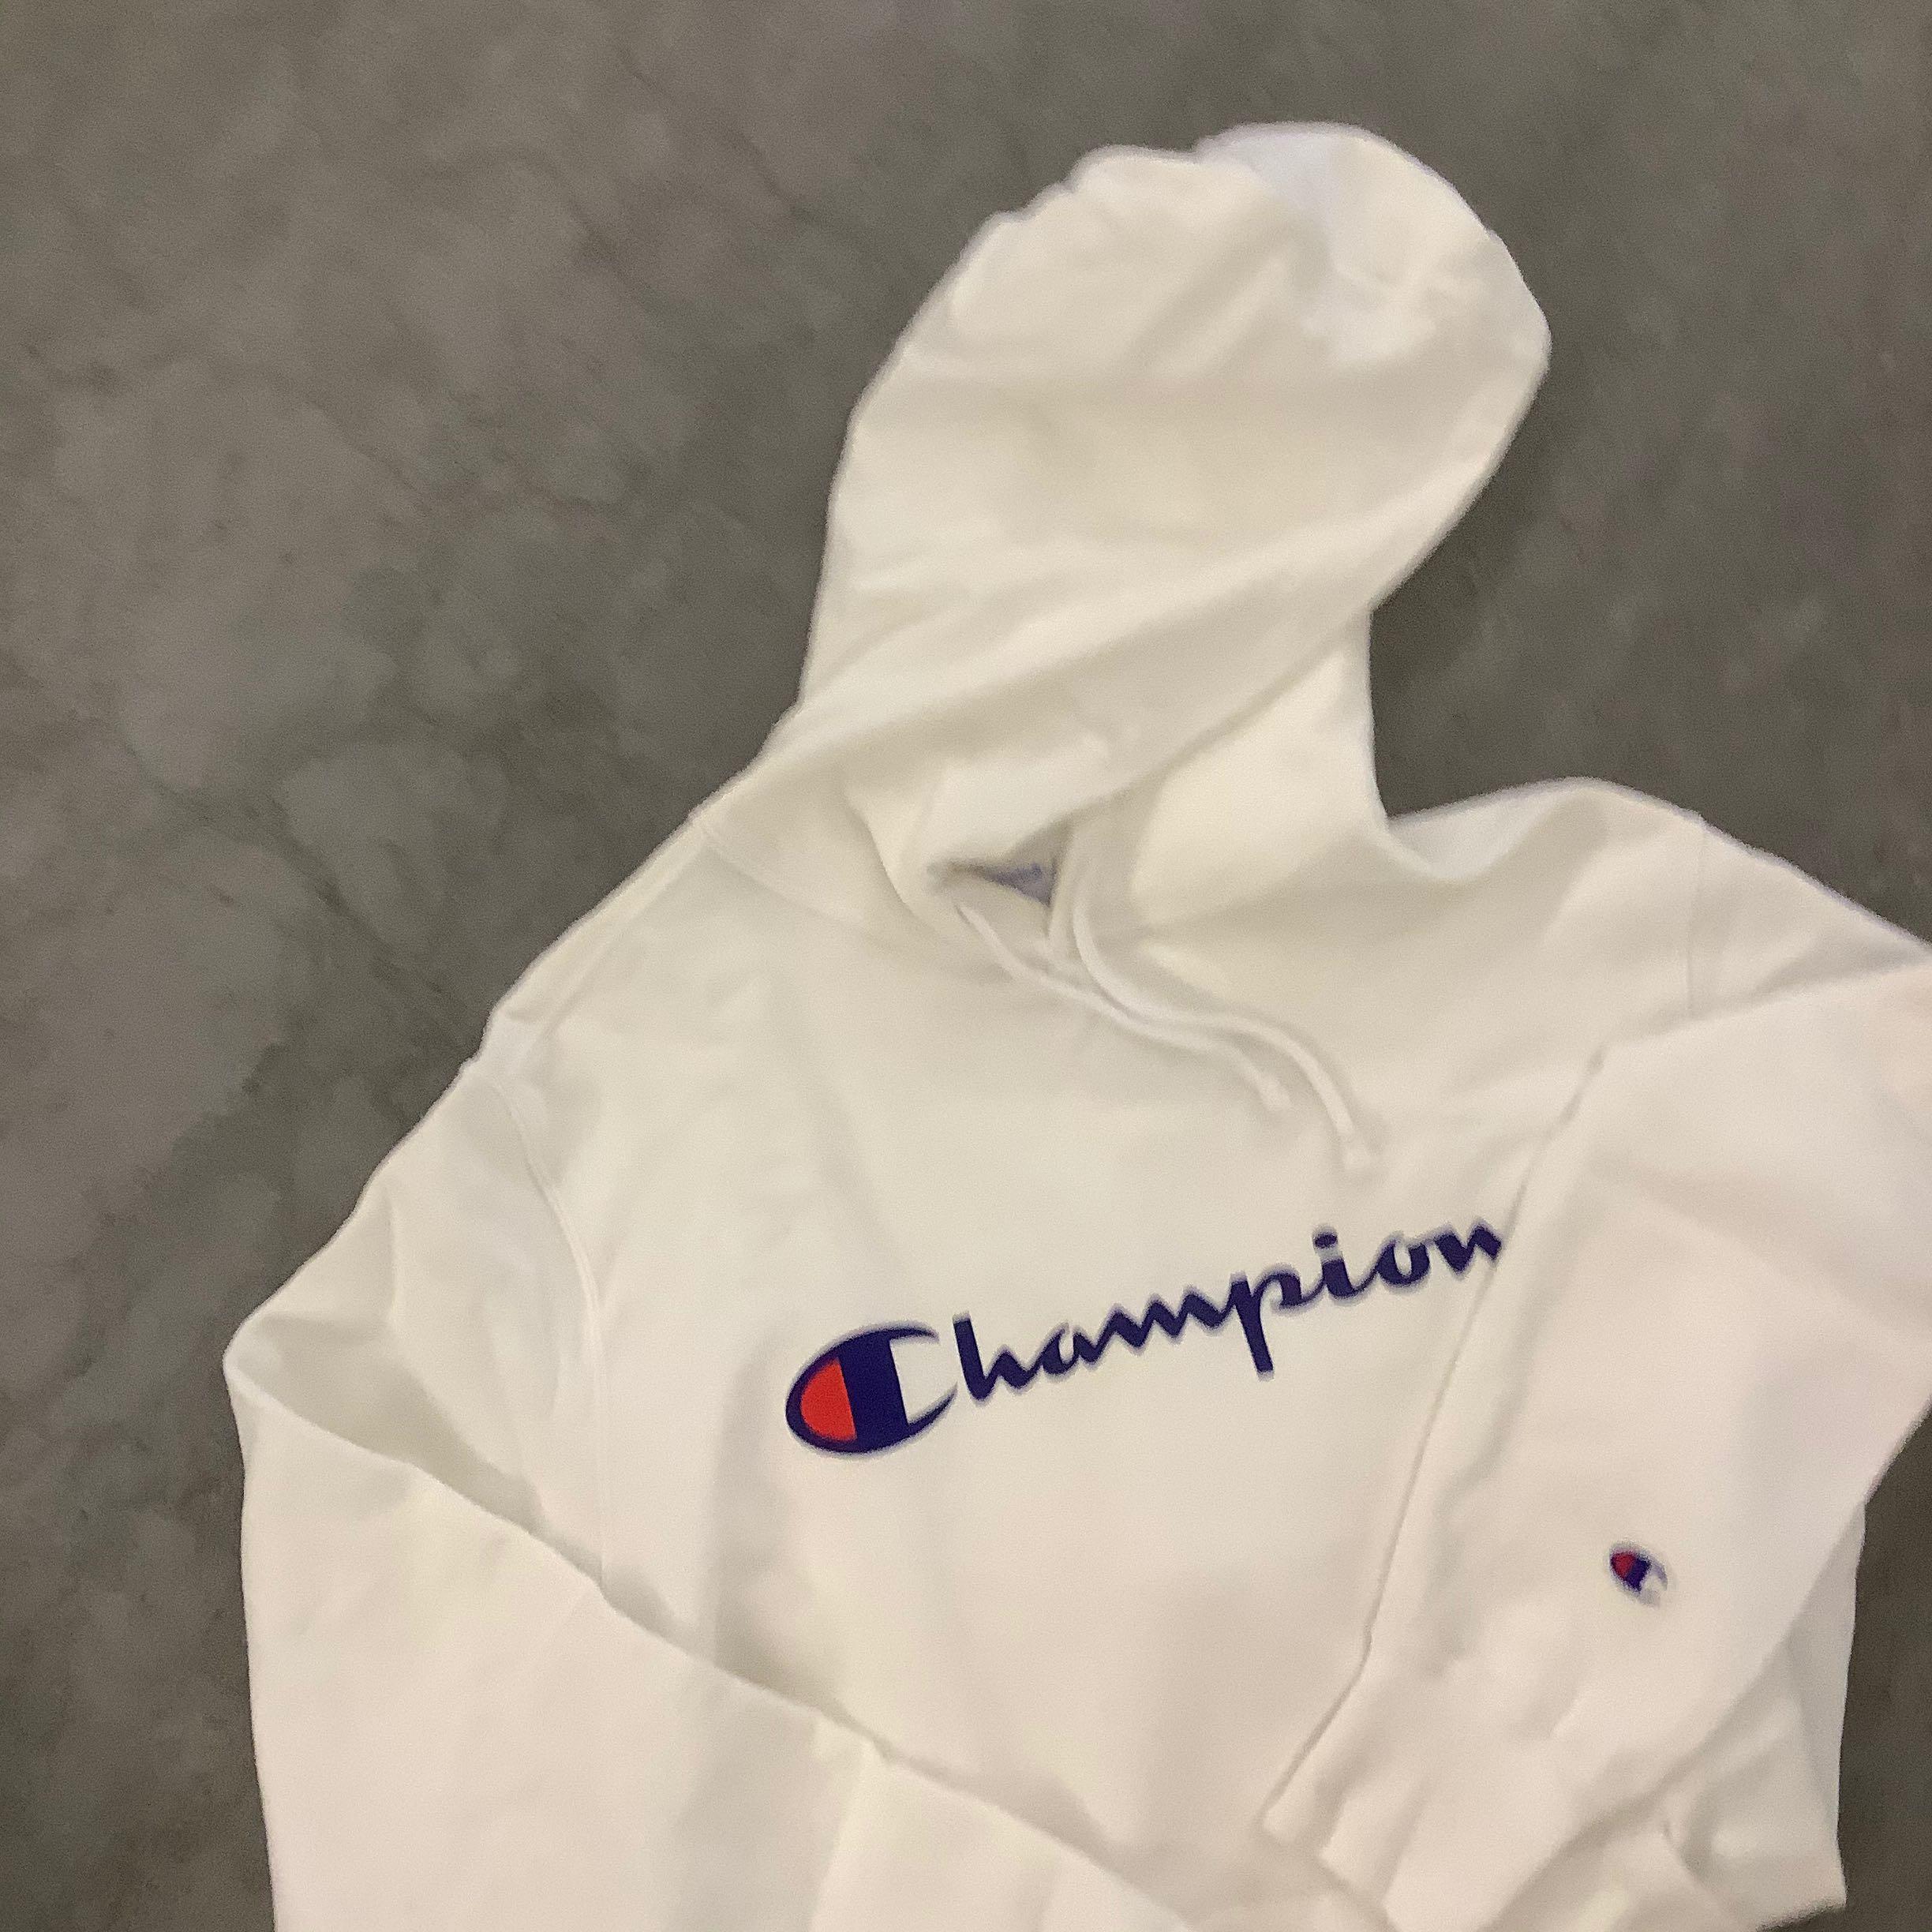 who bought champion clothing